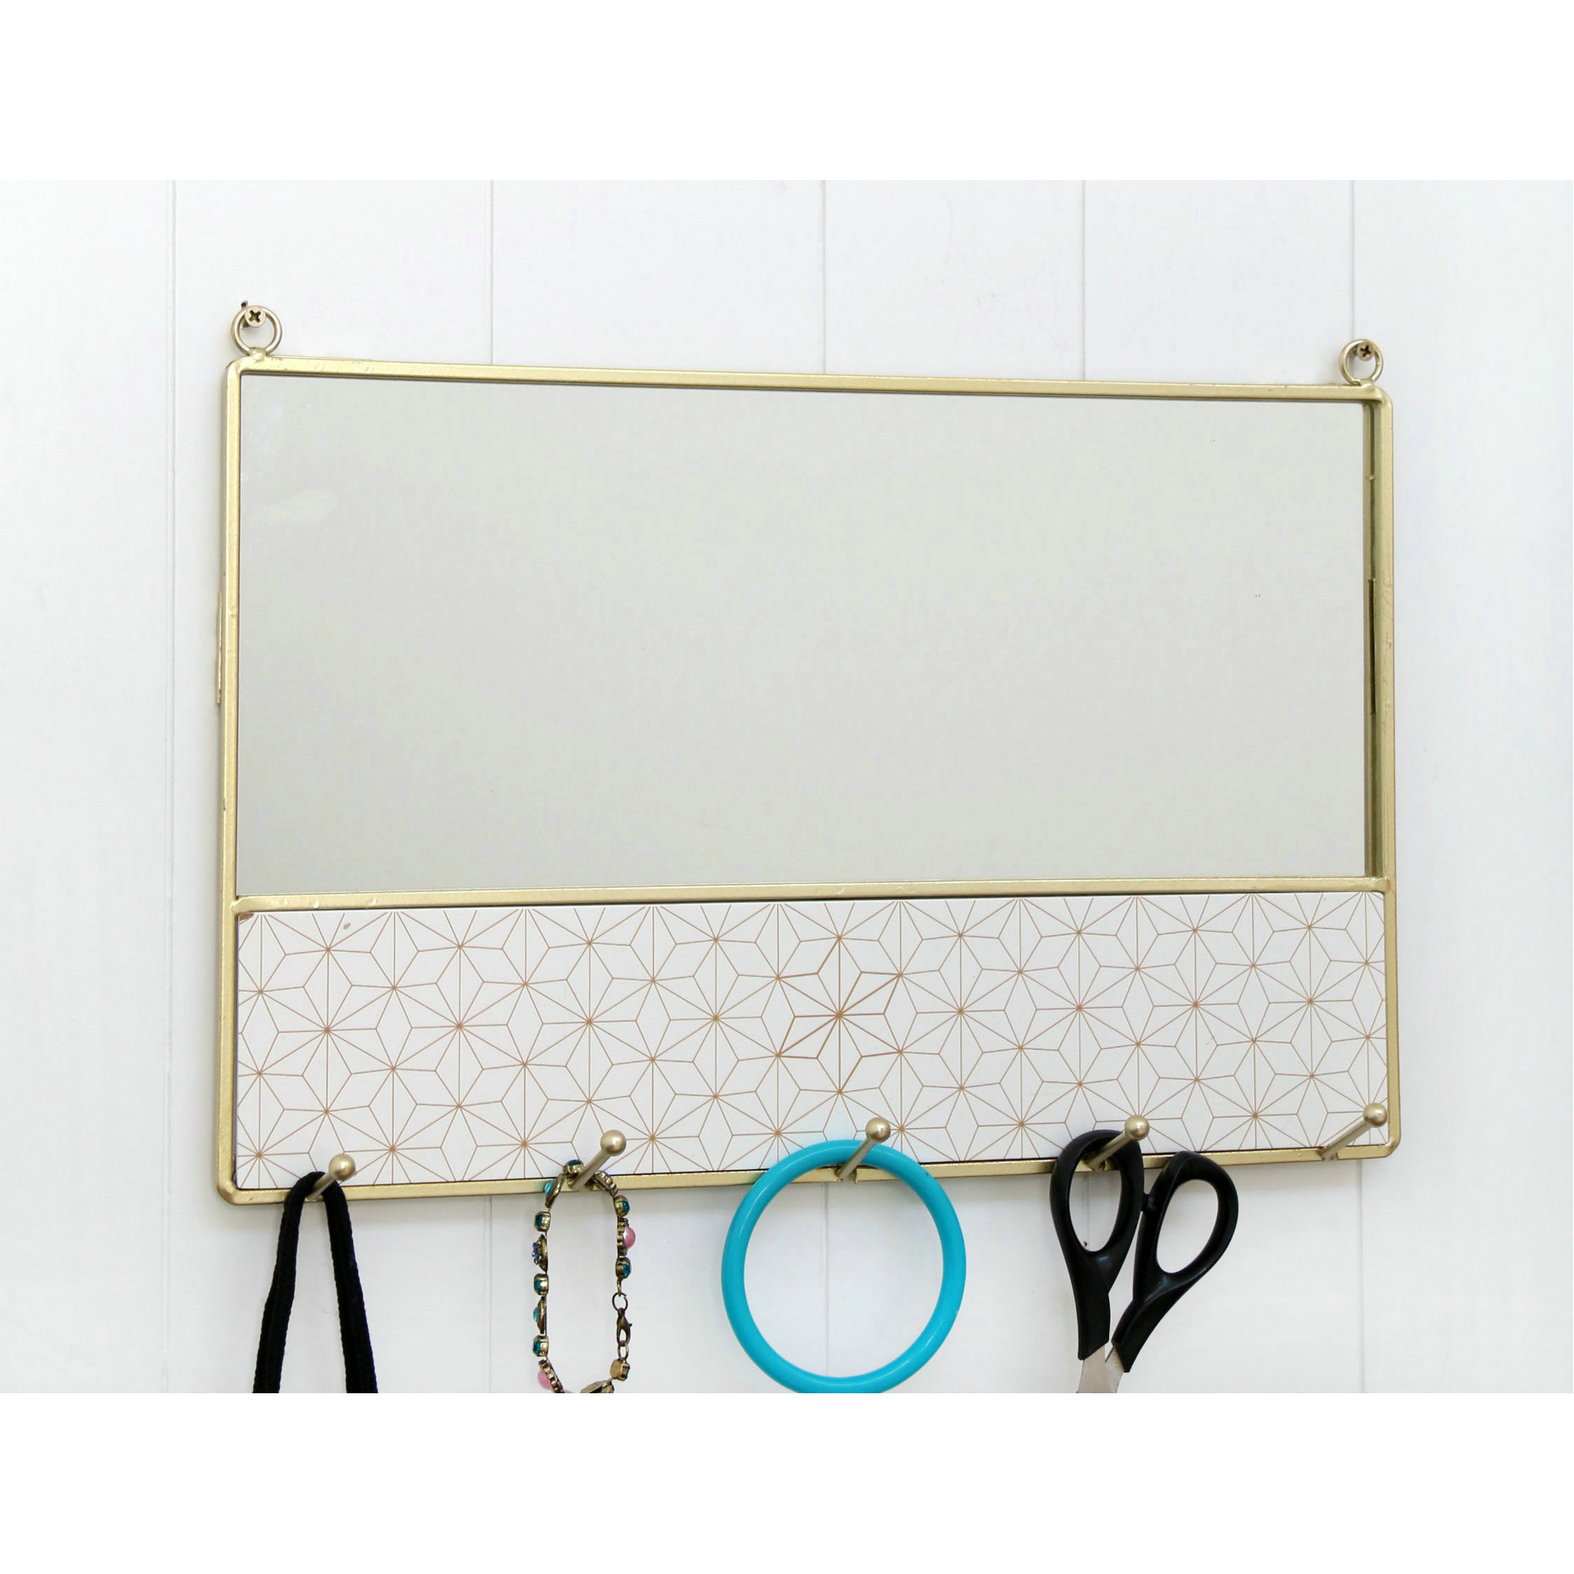 FU-22076  Wire jewellery holder with mirror and hooks 40x27x5.5cm